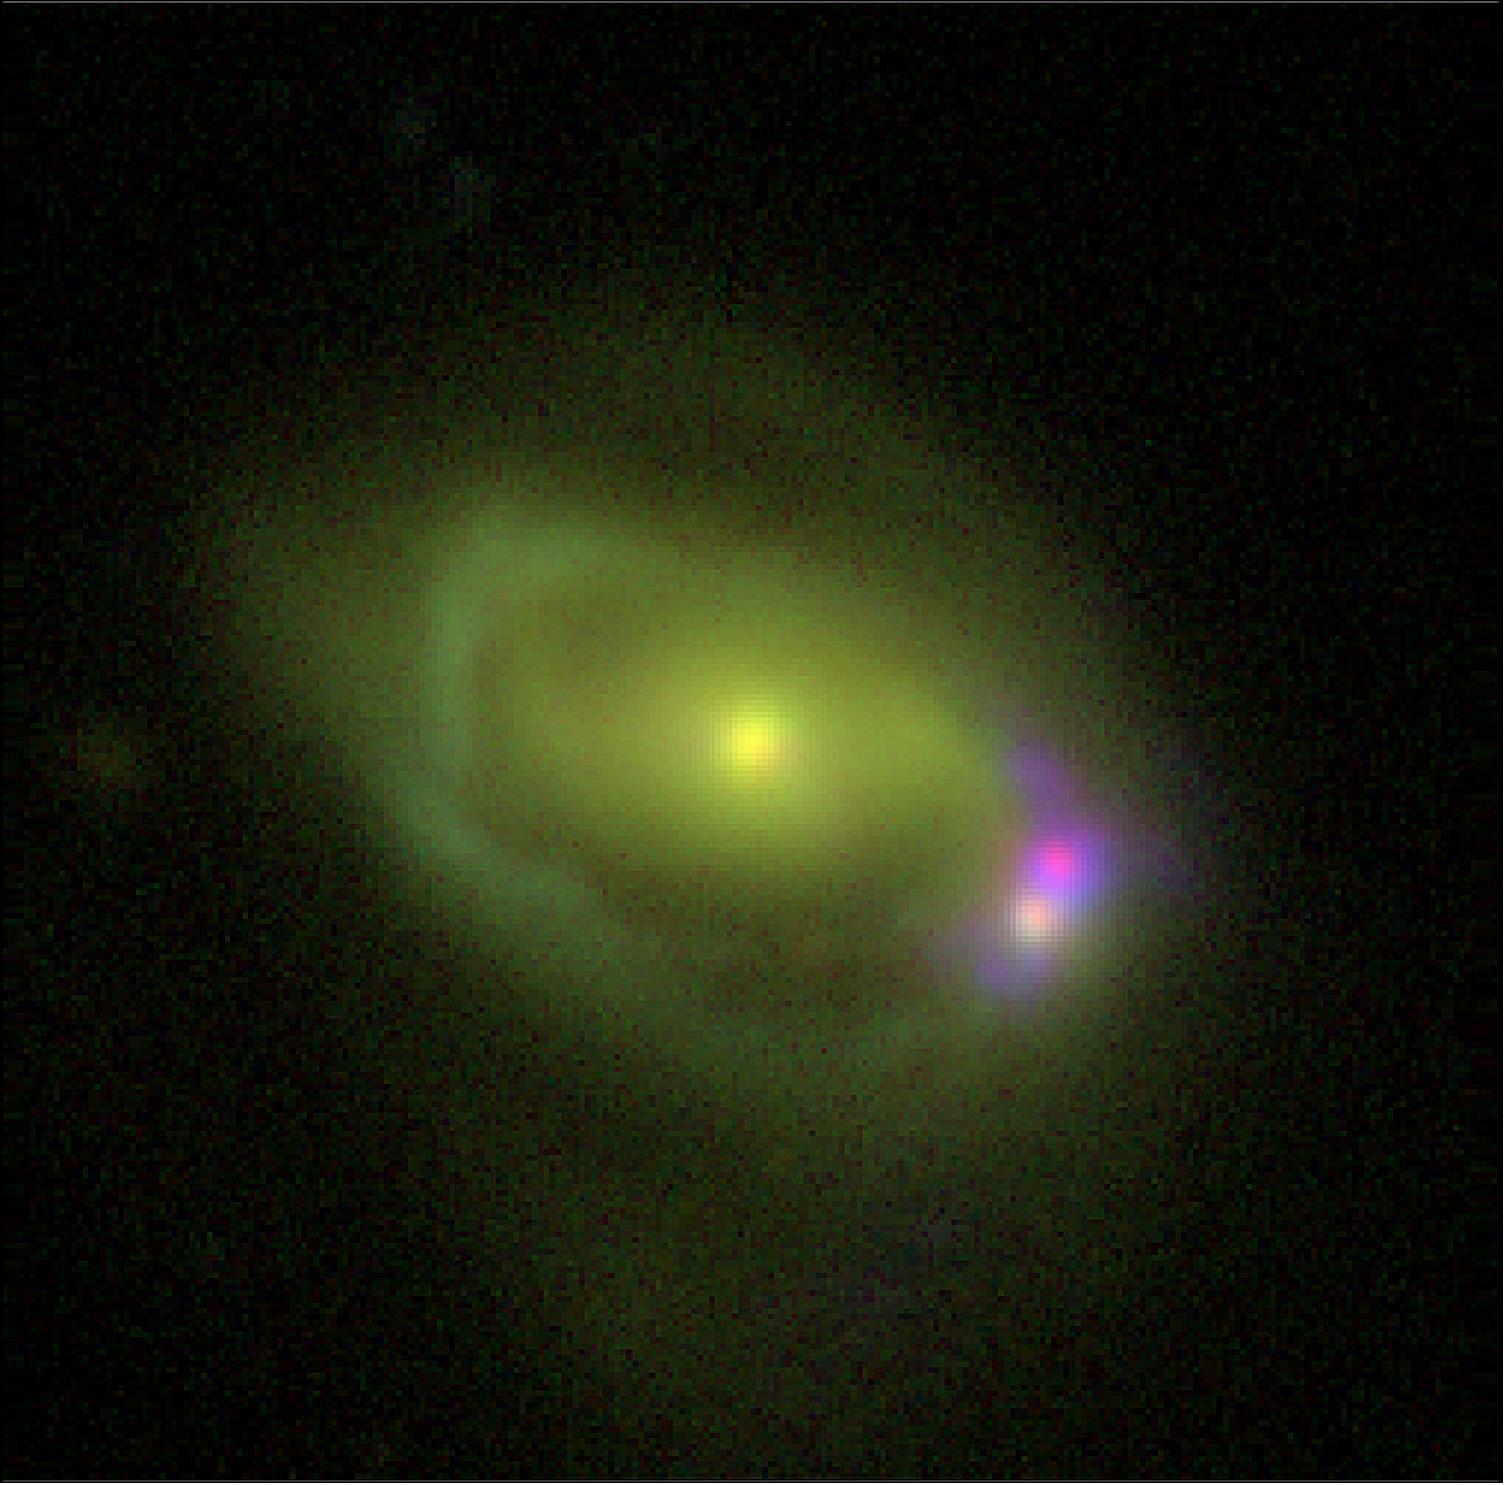 Figure 27: This optical image shows the Was 49 system, which consists of a large disk galaxy, Was 49a, merging with a much smaller "dwarf" galaxy Was 49b. The image was compiled using observations from the DCT (Discovery Channel Telescope) in Happy Jack, Arizona, using the same color filters as the Sloan Digital Sky Survey (image credit: DCT/NRL)